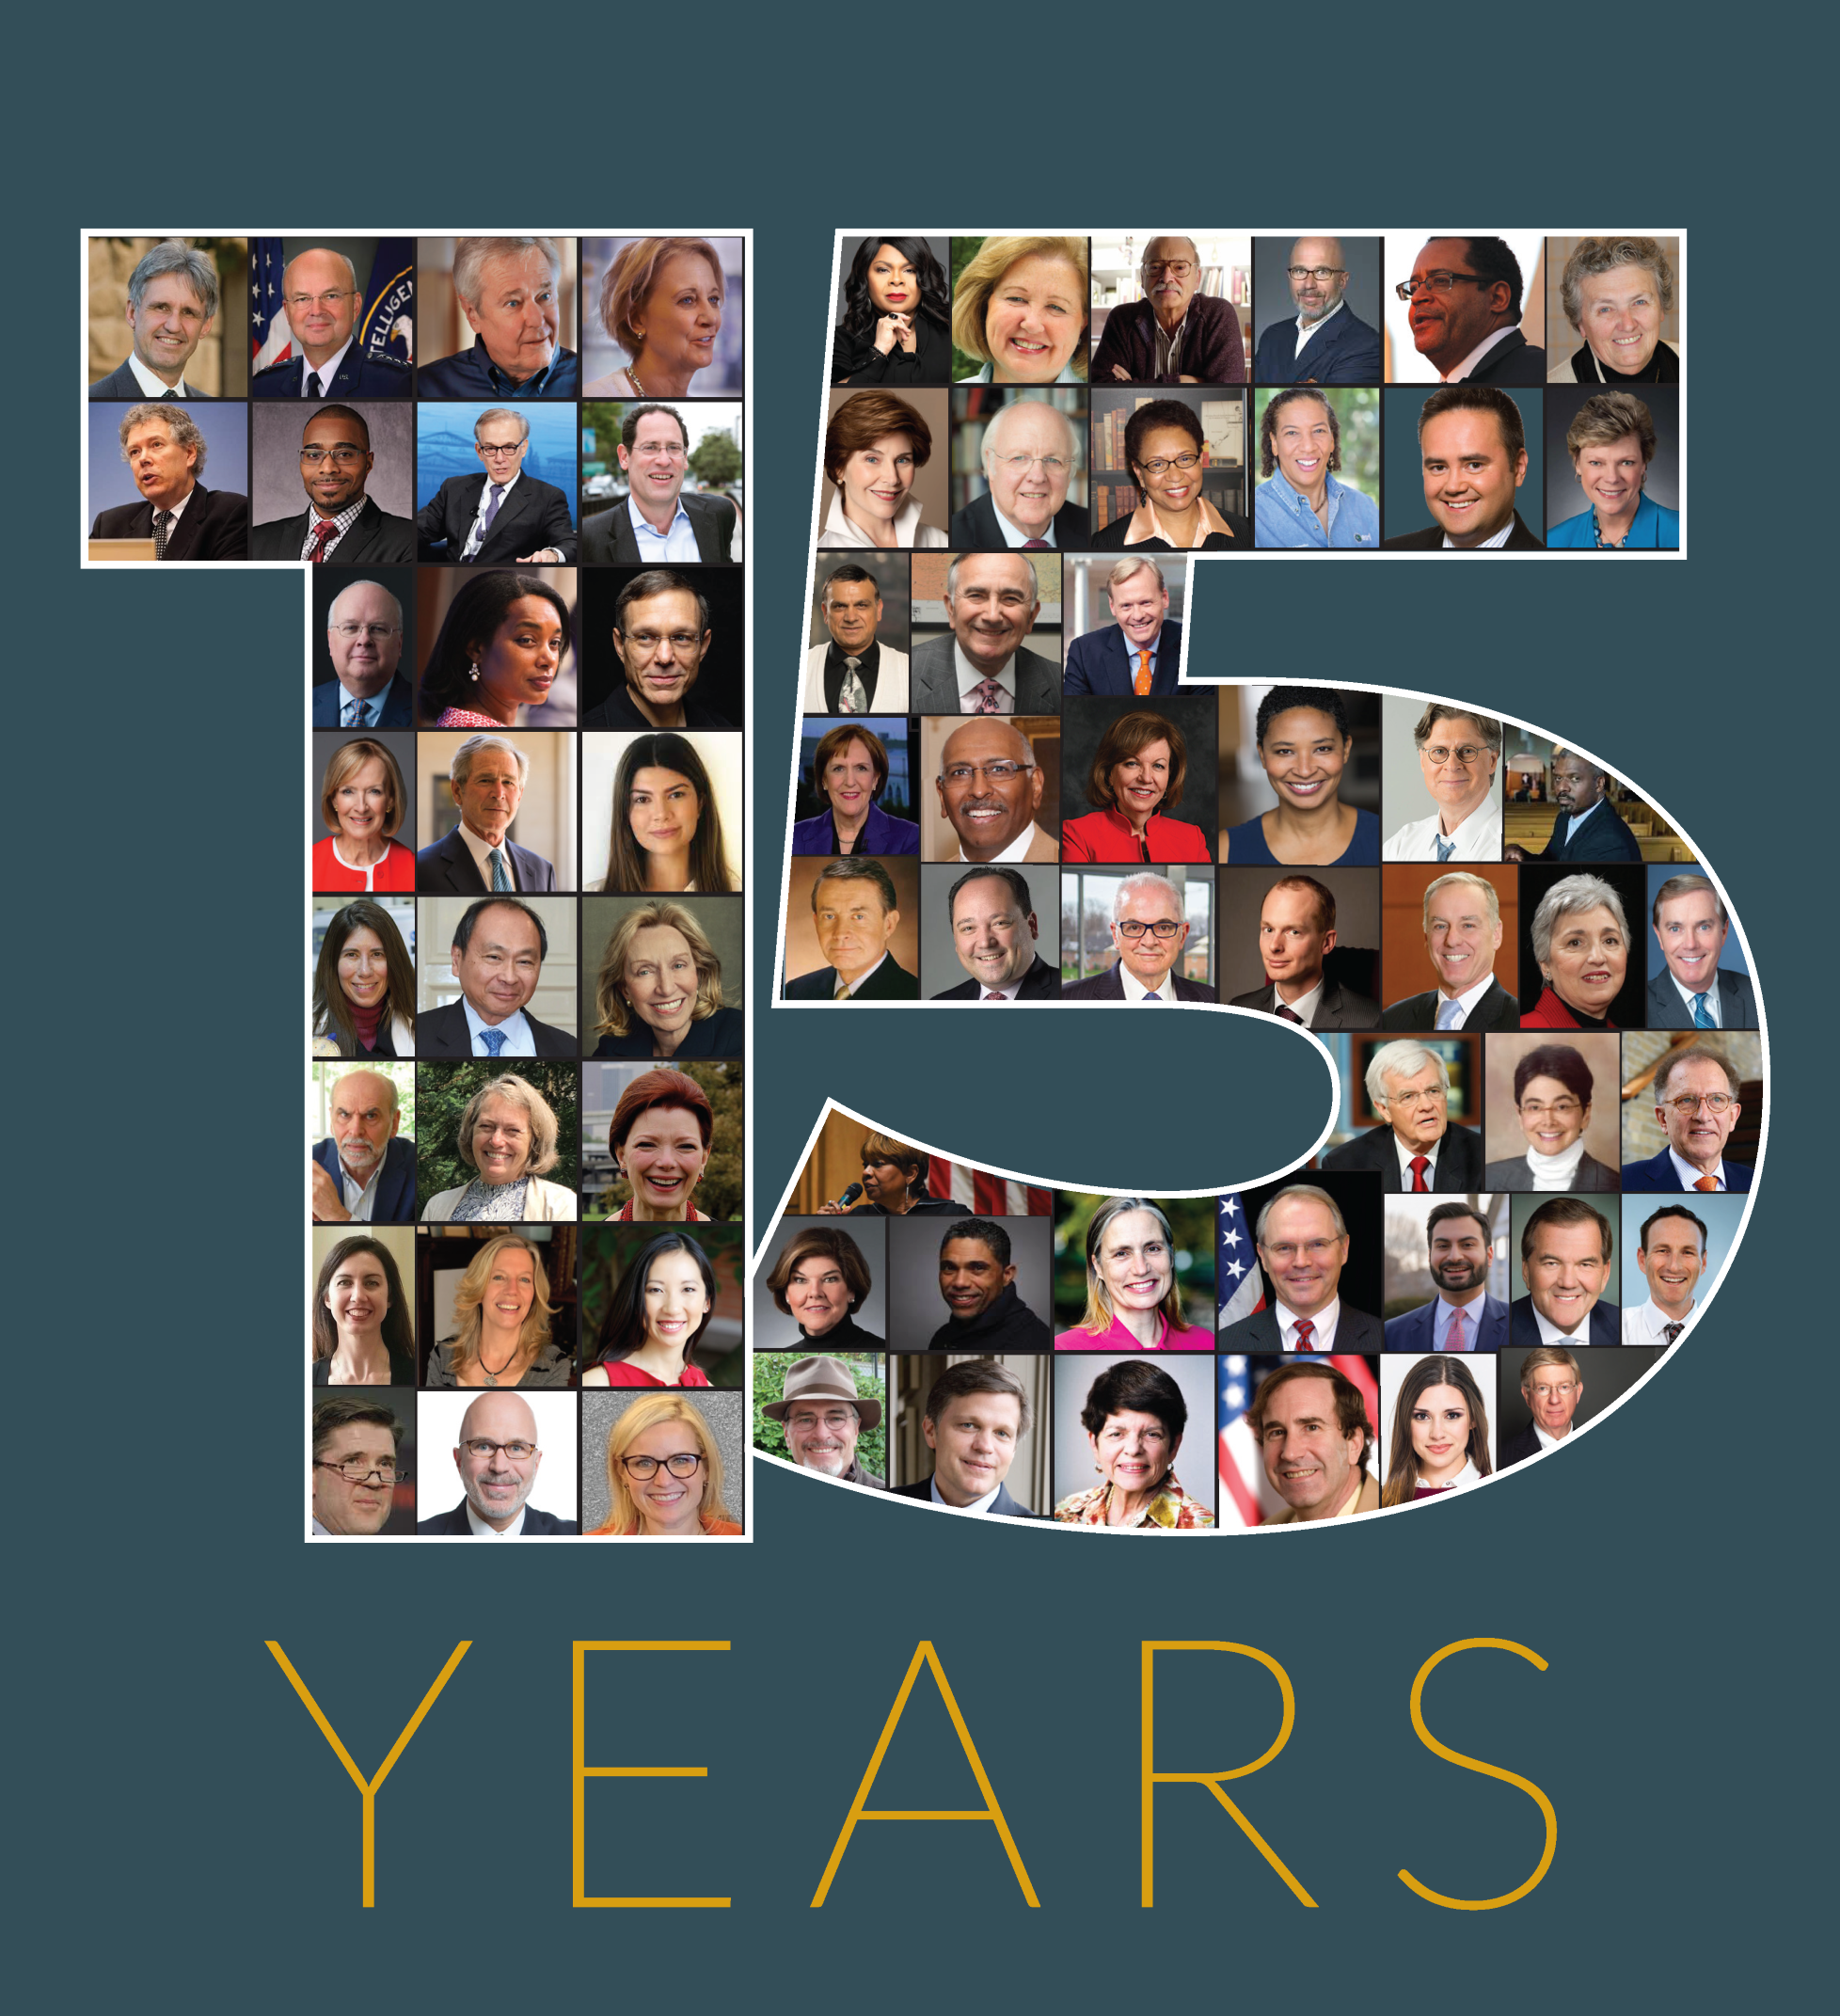 15th Anniversary Gala Tickets Now Available!